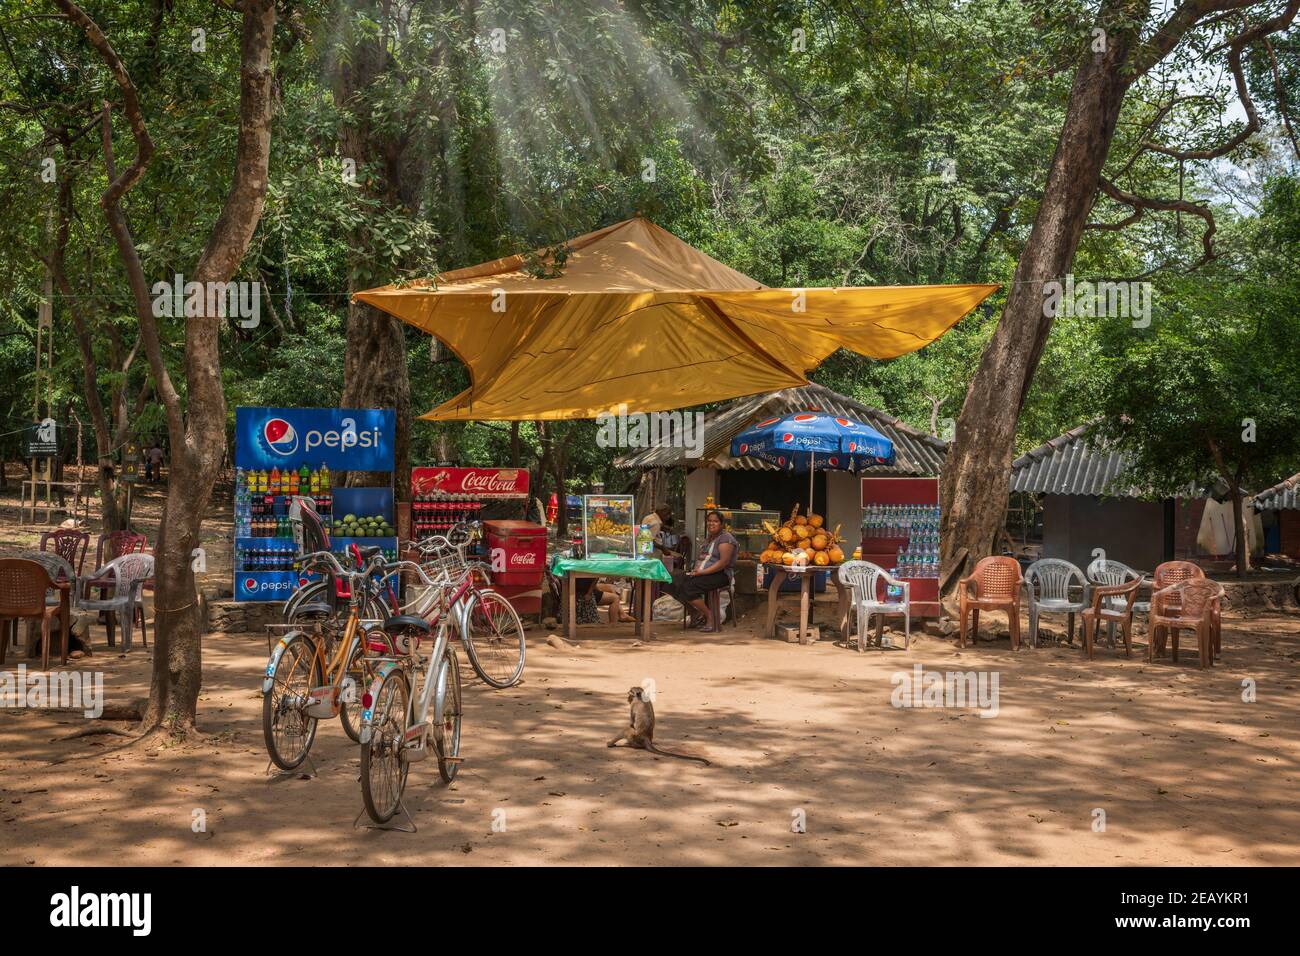 Sheltering under an awning from the midday sun, a small family run business offers refreshments to passing tourists at the ancient city of Polonnarawu Stock Photo